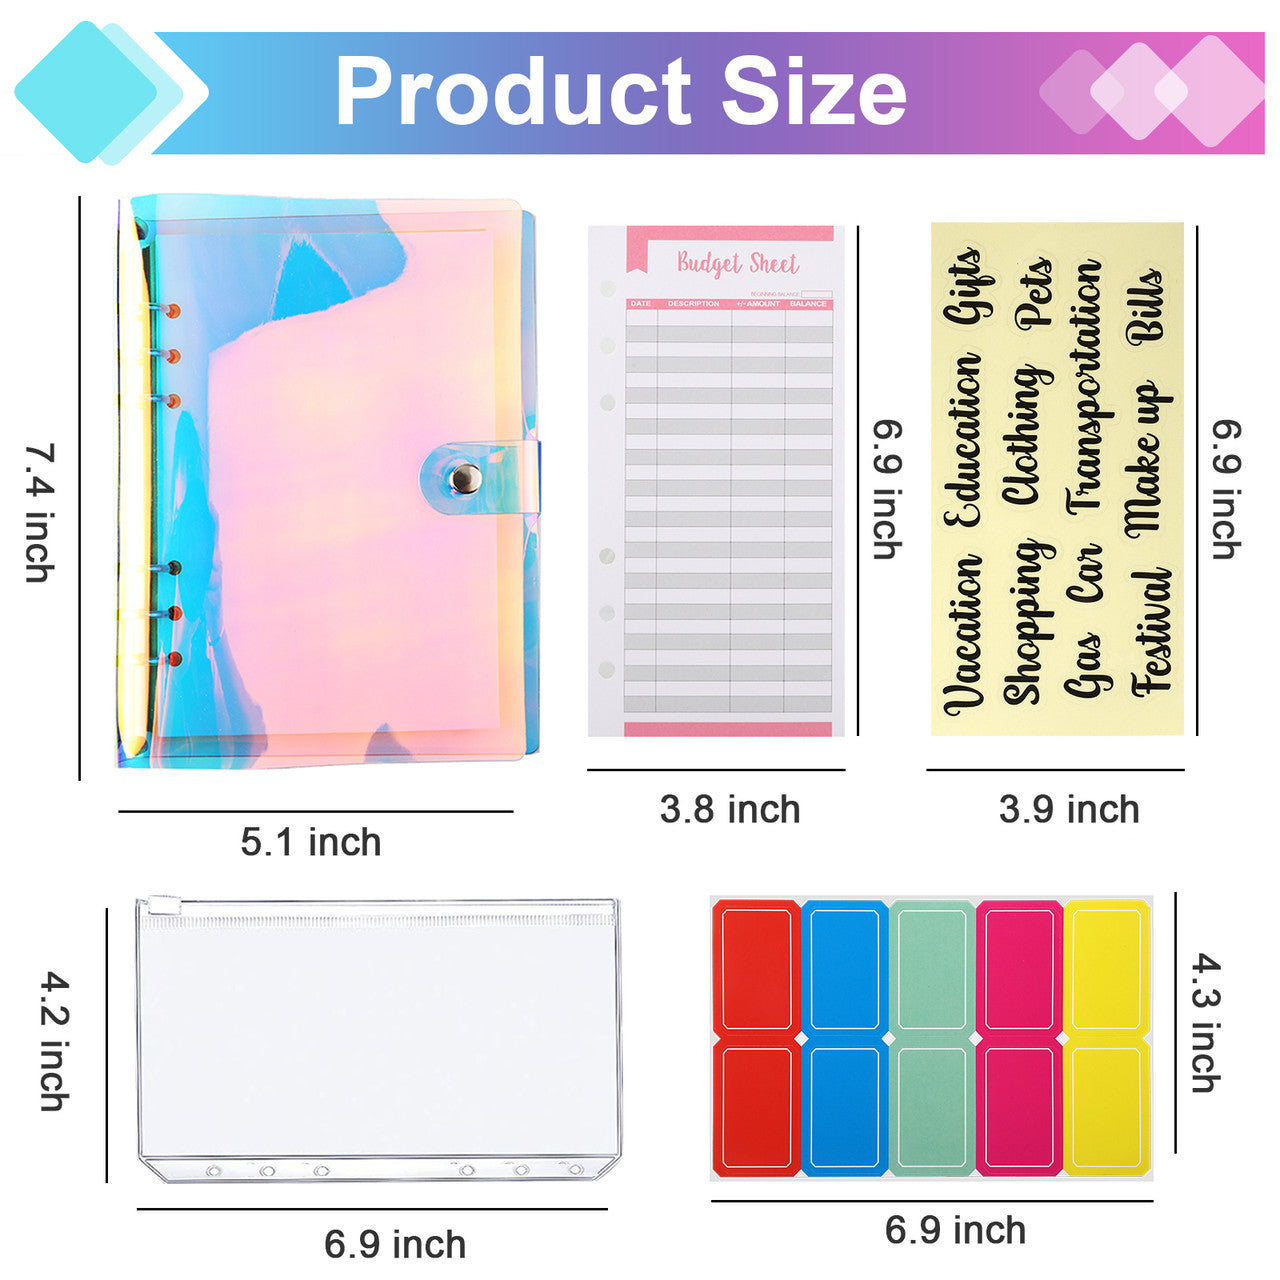 40 Packs A6 Pvc Notebook Binder Cover Budget Planner - Refillable Binder 6-Ring Personal Notebook Budget Binder Cover for A6 Refill Paper, Zipper Pockets, Budget Sheets, No Tear Stickers, Category Labels (Pink)